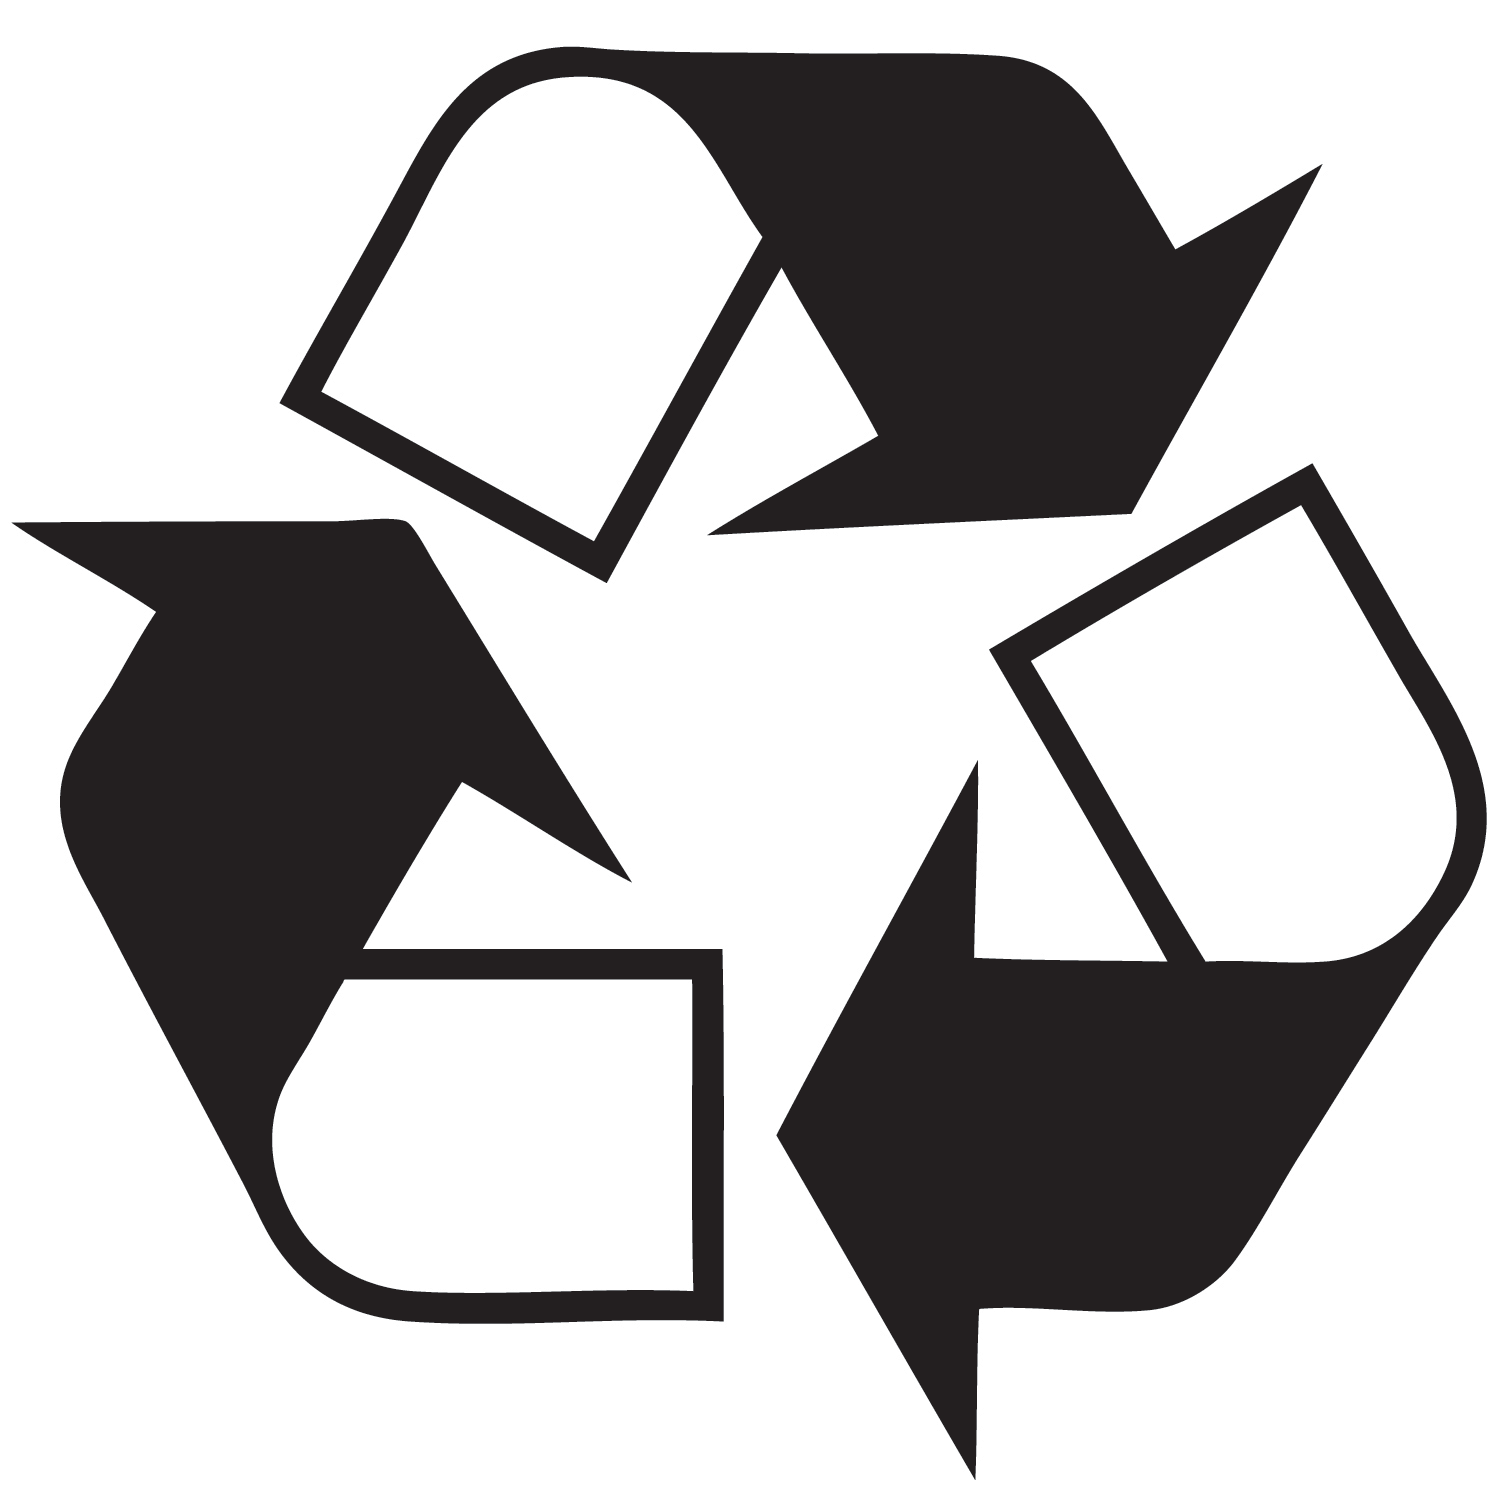 Free Printable Recycle Symbol - ClipArt Best